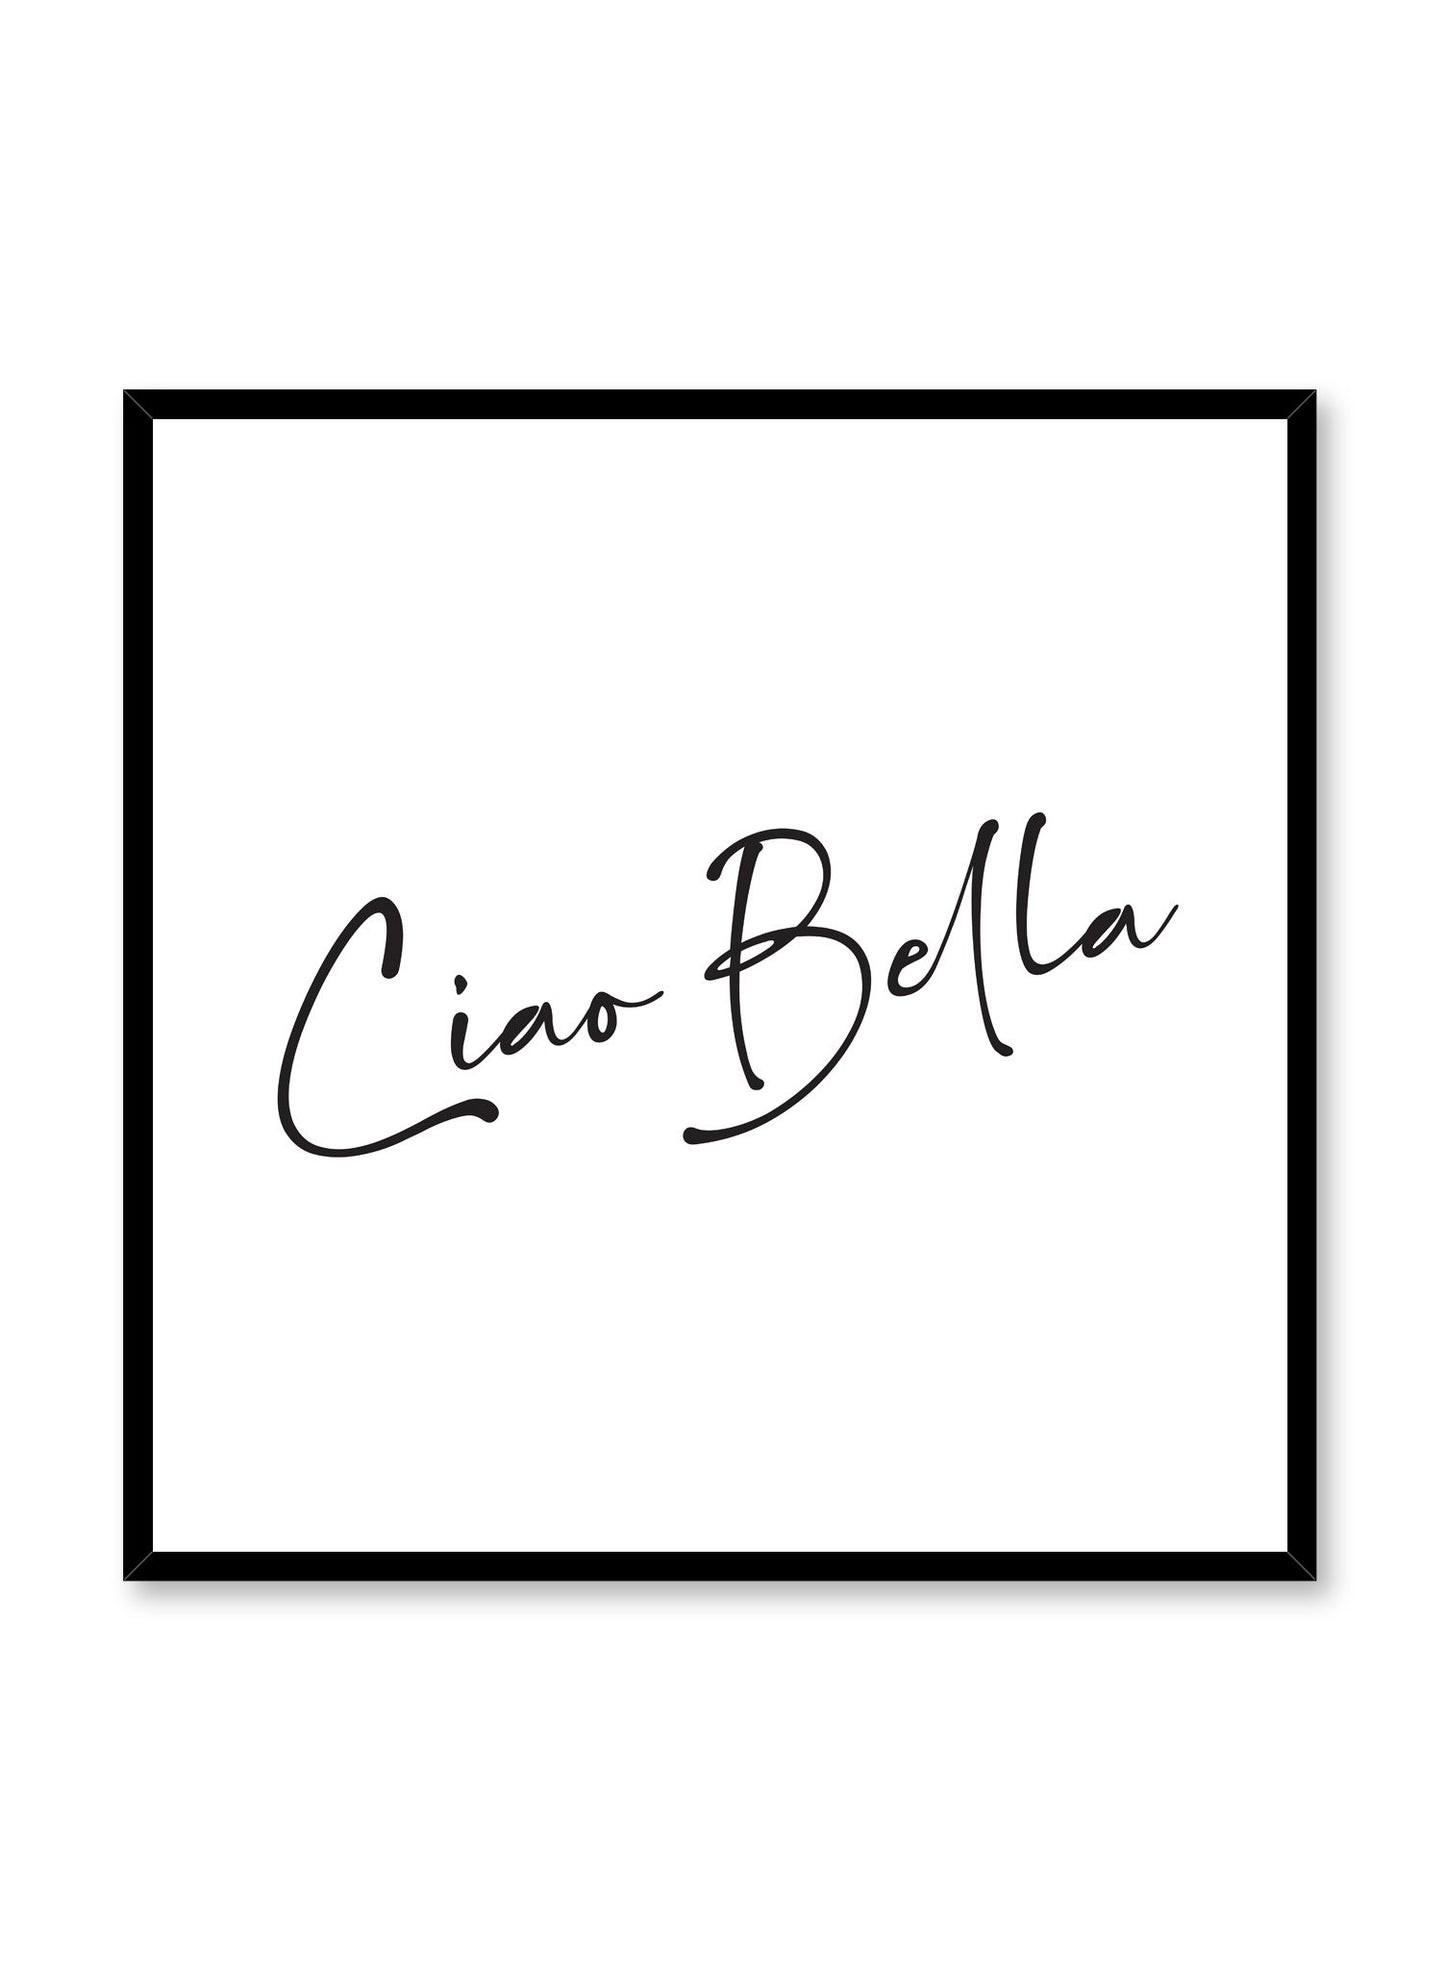 Ciao Bella modern minimalist typography art print by Opposite Wall in square format